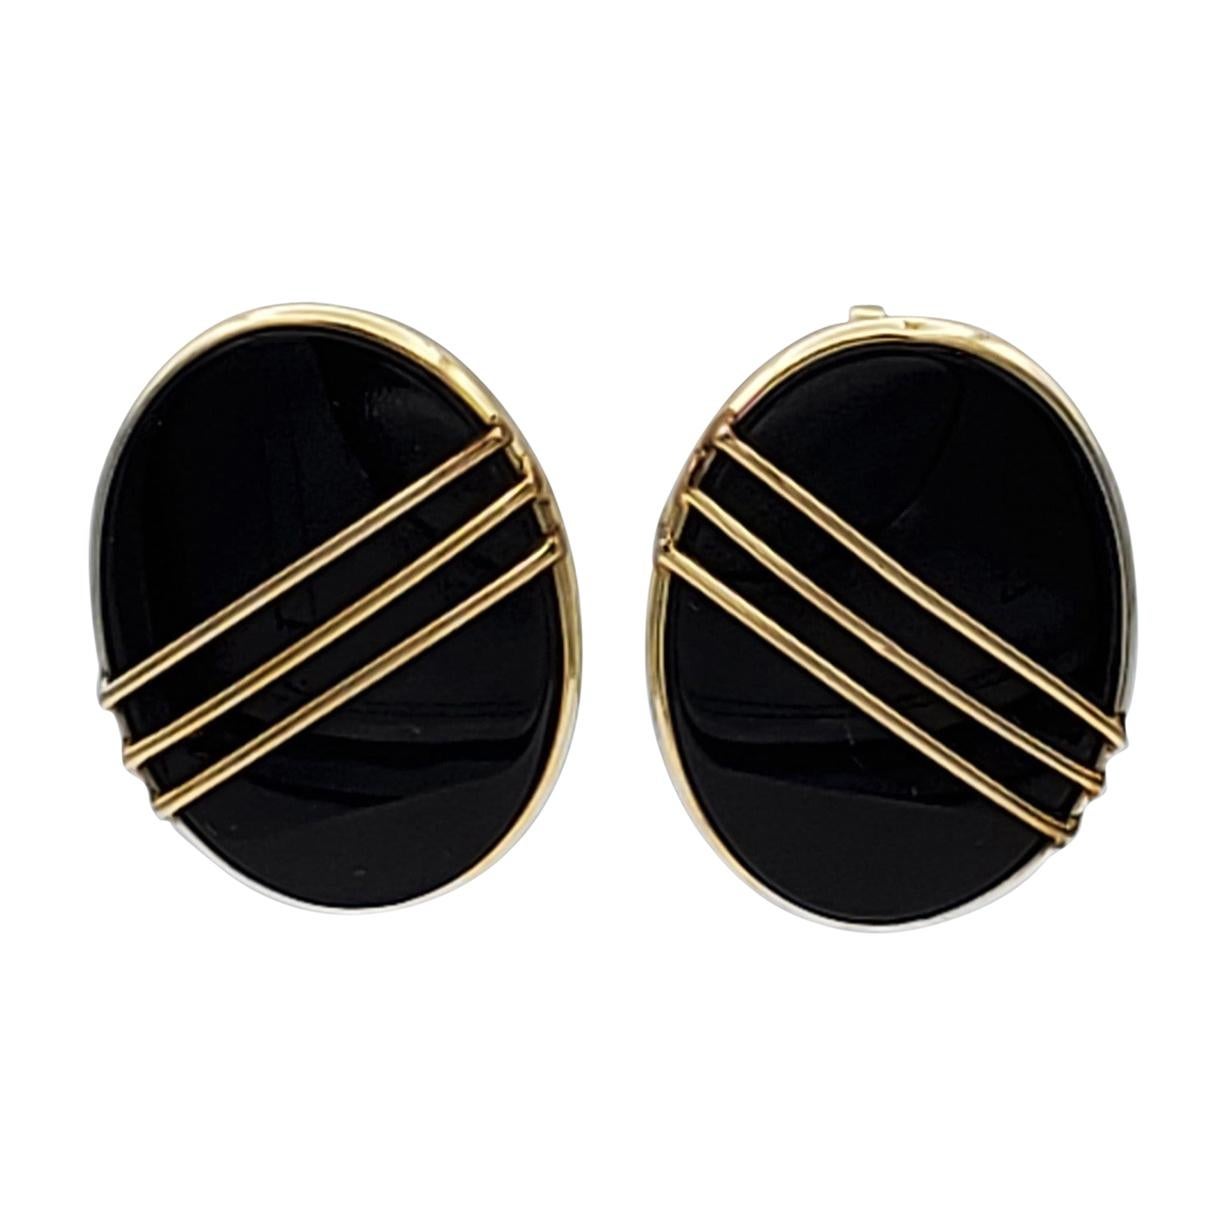 Designer 14 Karat Yellow Gold Friction Post Earrings with Oval Black Onyx Inlay